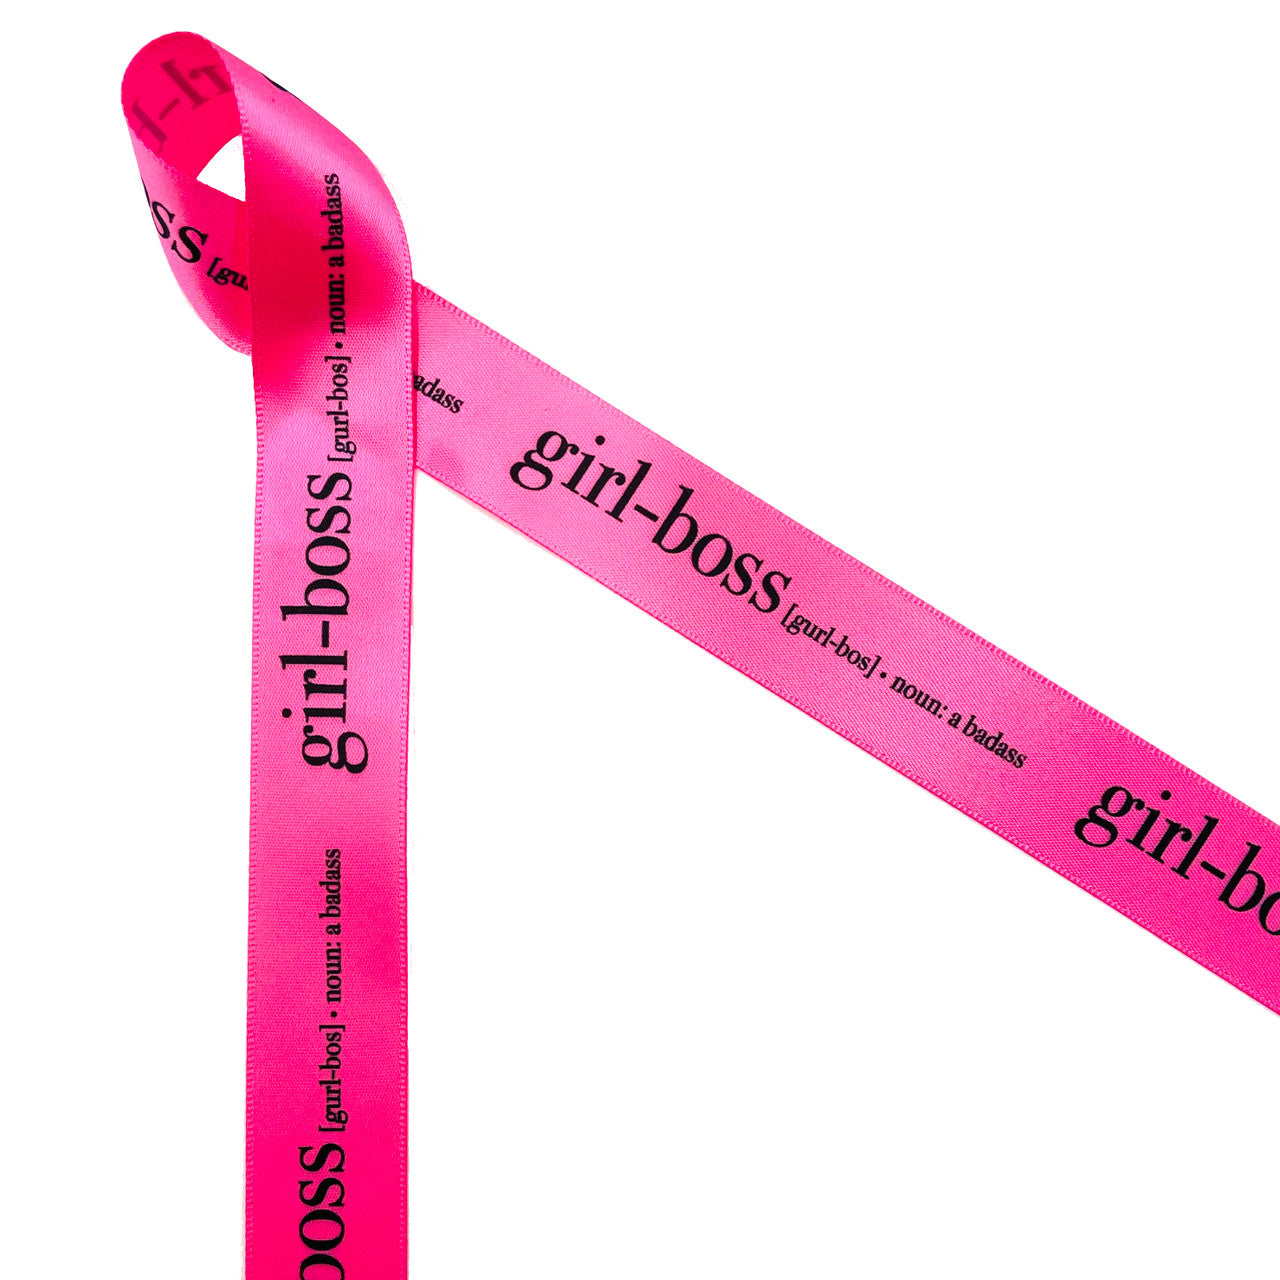 Girl Boss ribbon with black font and definition printed on 7/8" hot pink single face satin is a fun ribbon for so many occasions. This is a fun ribbon for girls night out, ladies night, promotion celebrations, bachelorette parties, and women in business. Use this ribbon for gift wrap, gift baskets party decor, table decor and floral design. This is a great ribbon for crafts, sewing and quilting projects too! All our ribbon is designed and printed in the USA